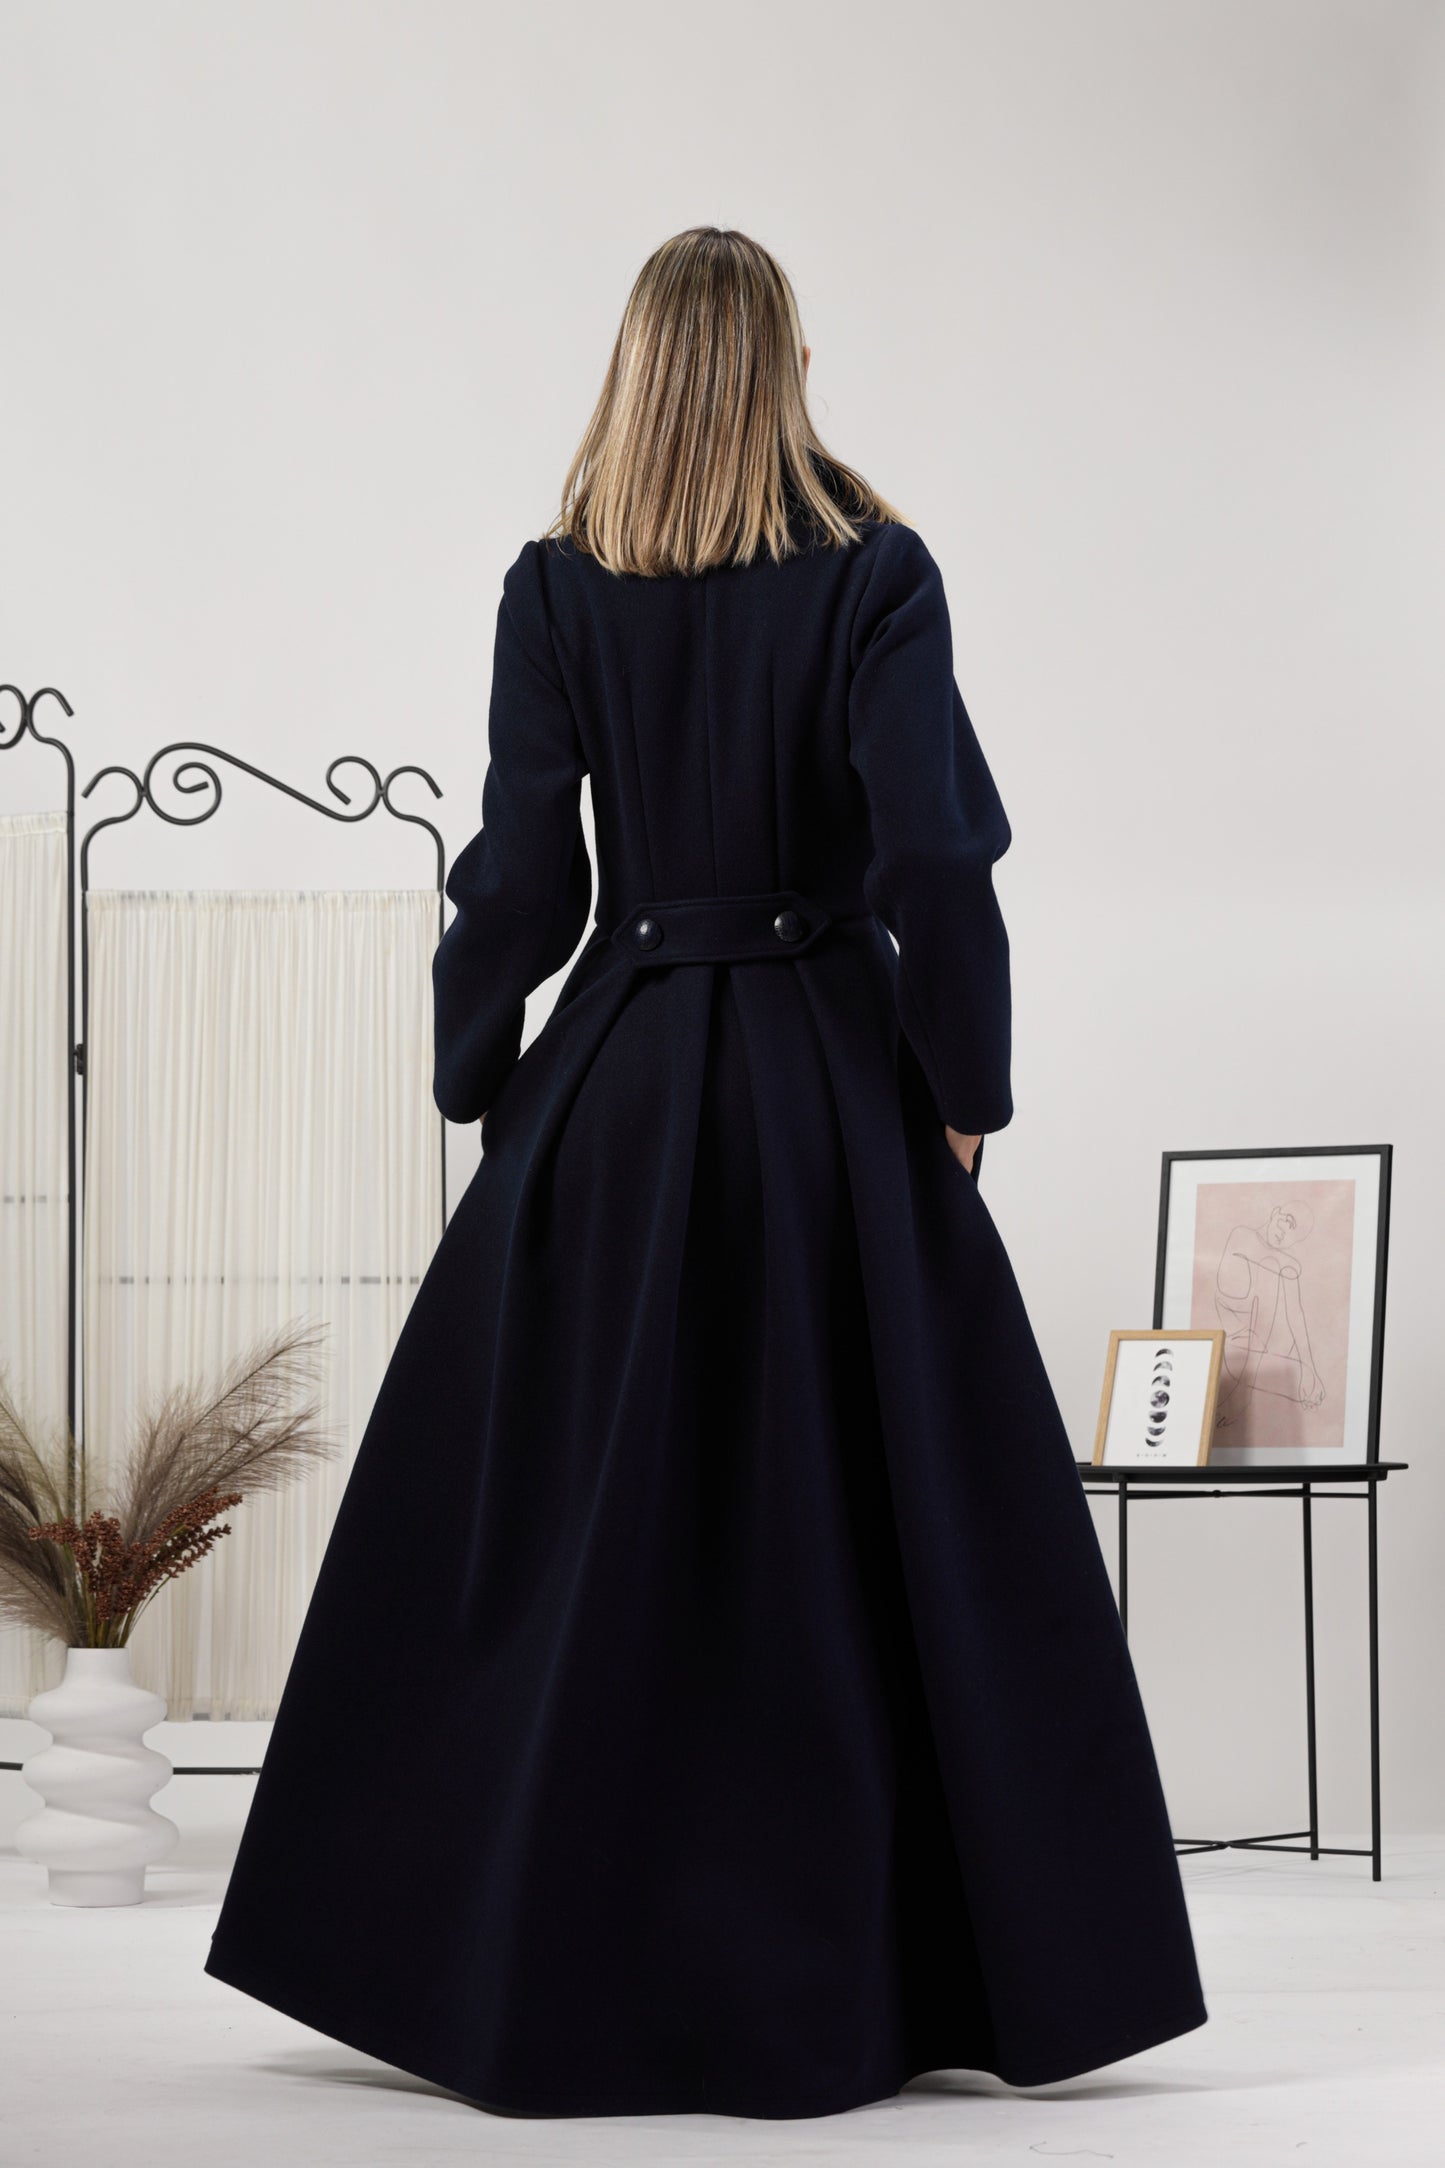 Wool princess maxi coat for easy living and fashion - Wool Princess Maxi Coat from NikkaPlace | Effortless fashion for easy living